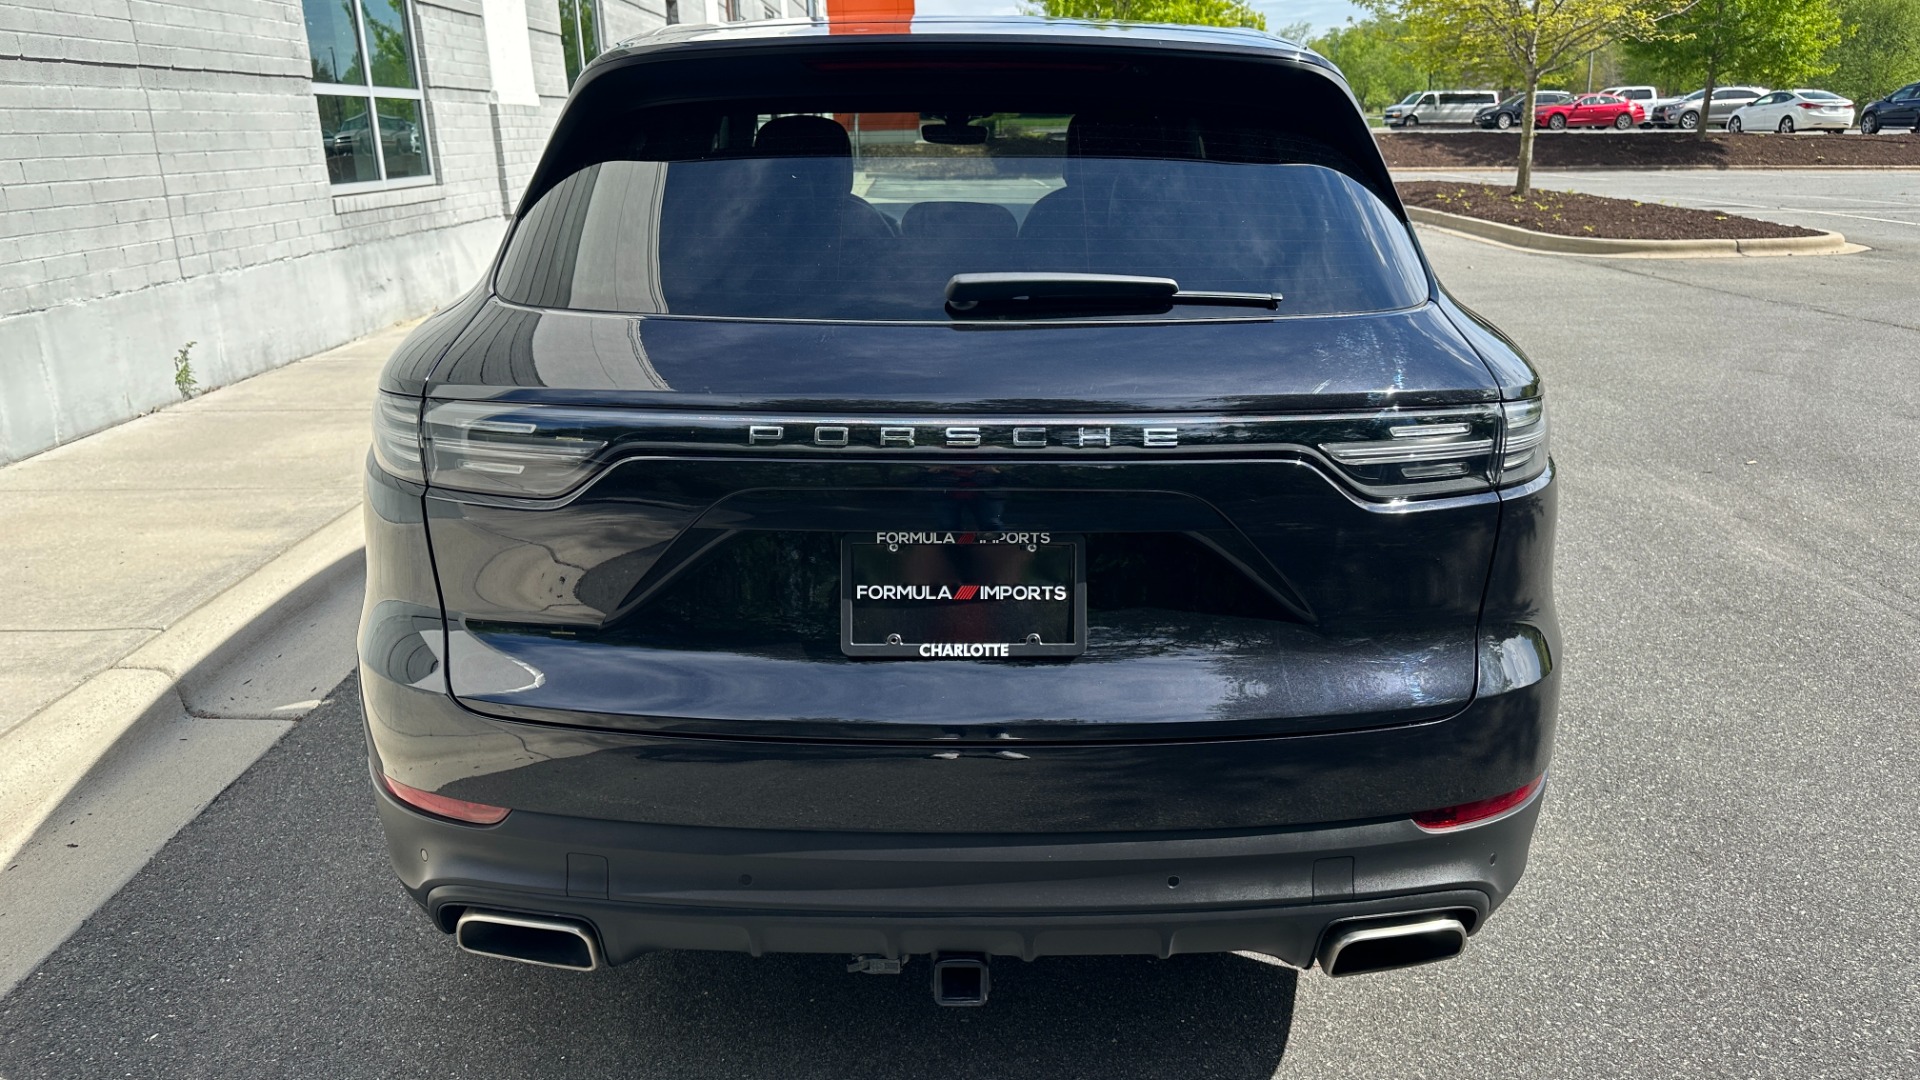 Used 2019 Porsche Cayenne AWD / PREMIUM / TOWING PKG / BOSE AUDIO / GLOSS BLACK TRIM for sale Sold at Formula Imports in Charlotte NC 28227 8